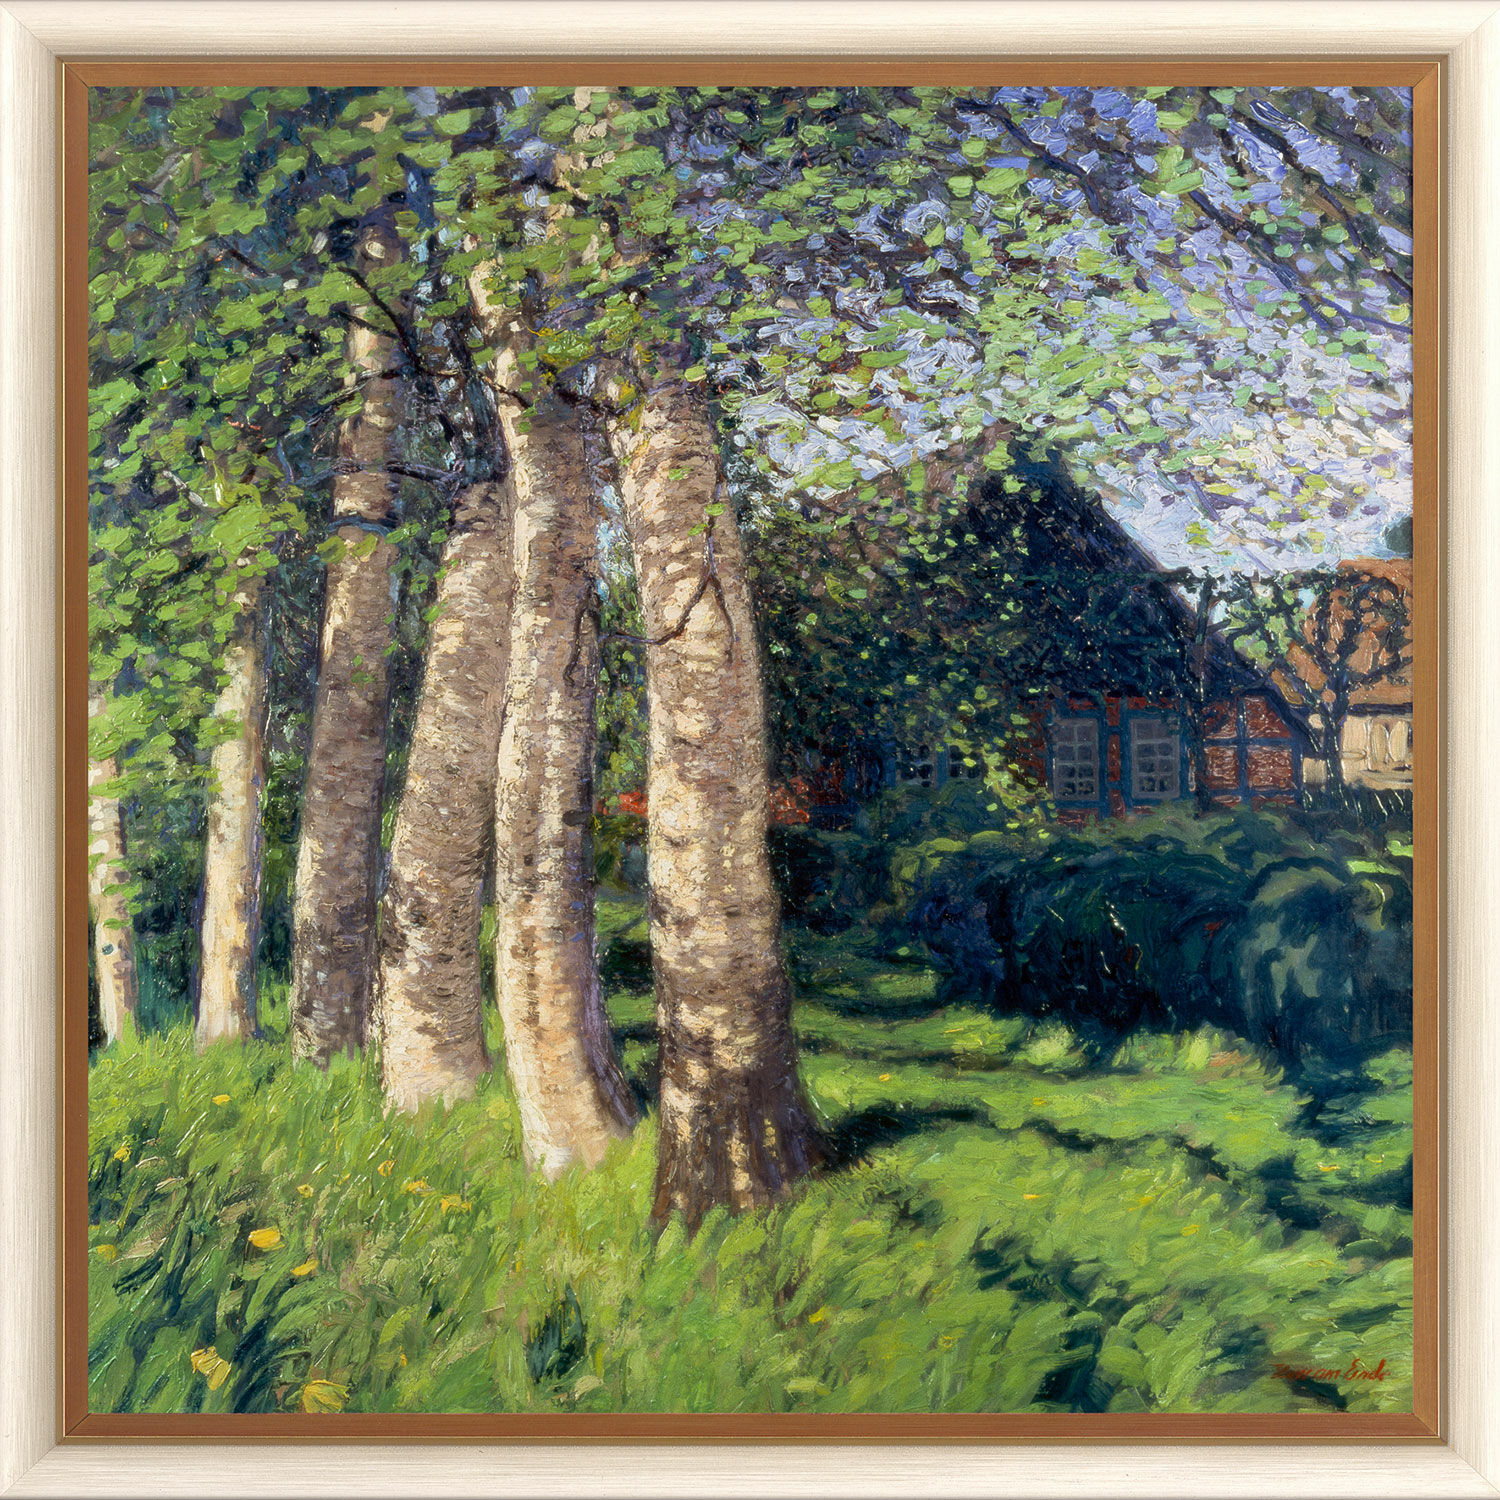 Picture "Spring in Worpswede" (1900), framed by Hans am Ende